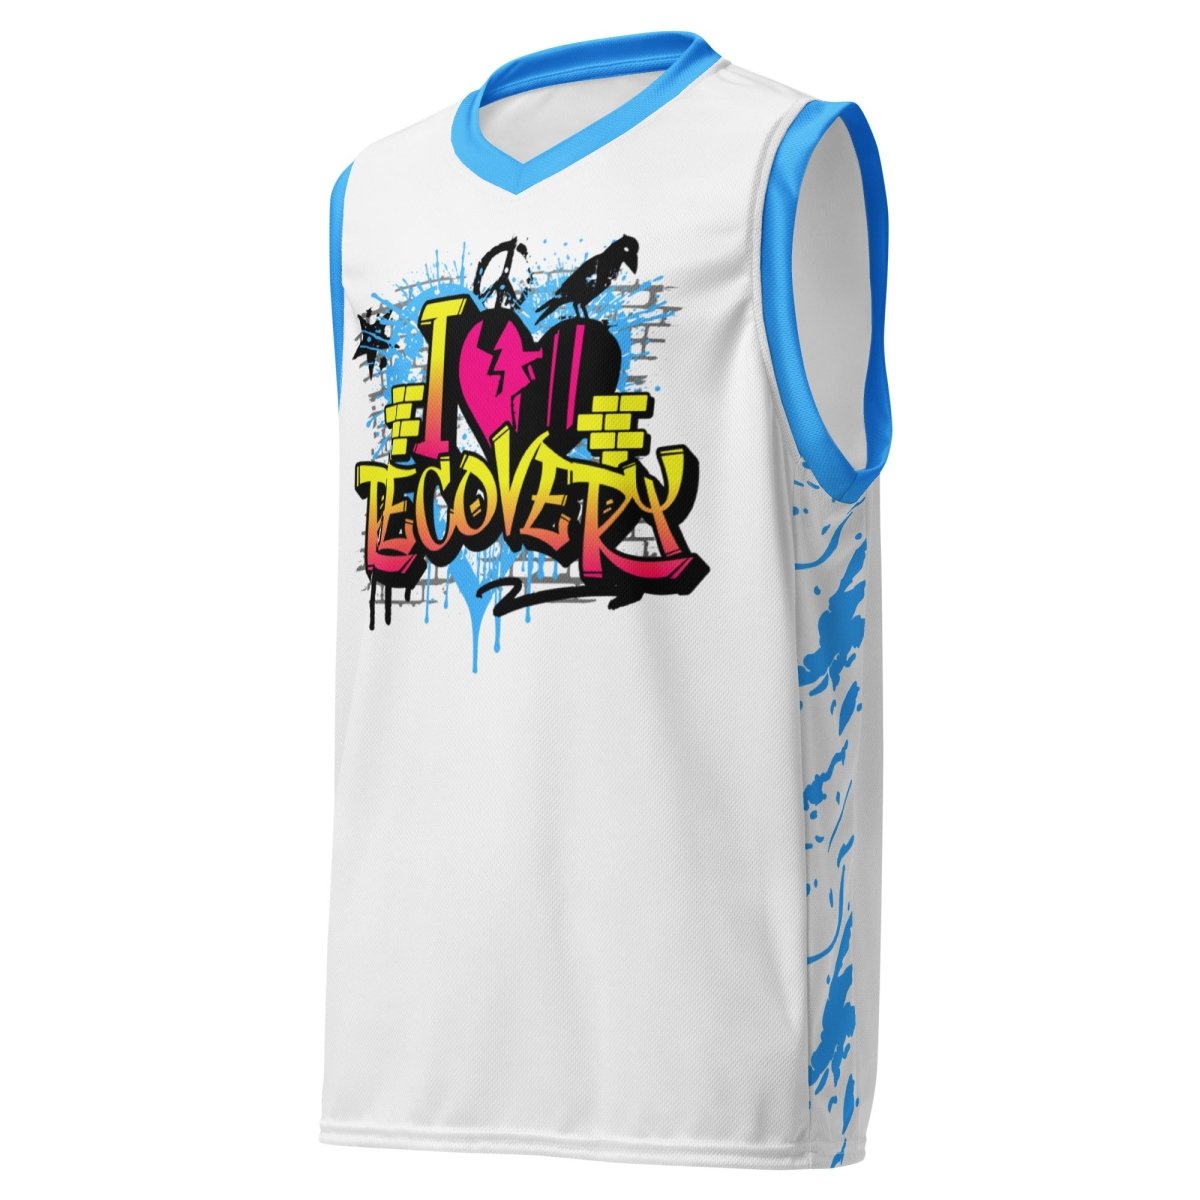 I Love Recovery Recycled Basketball Jersey - 2XS | Sobervation